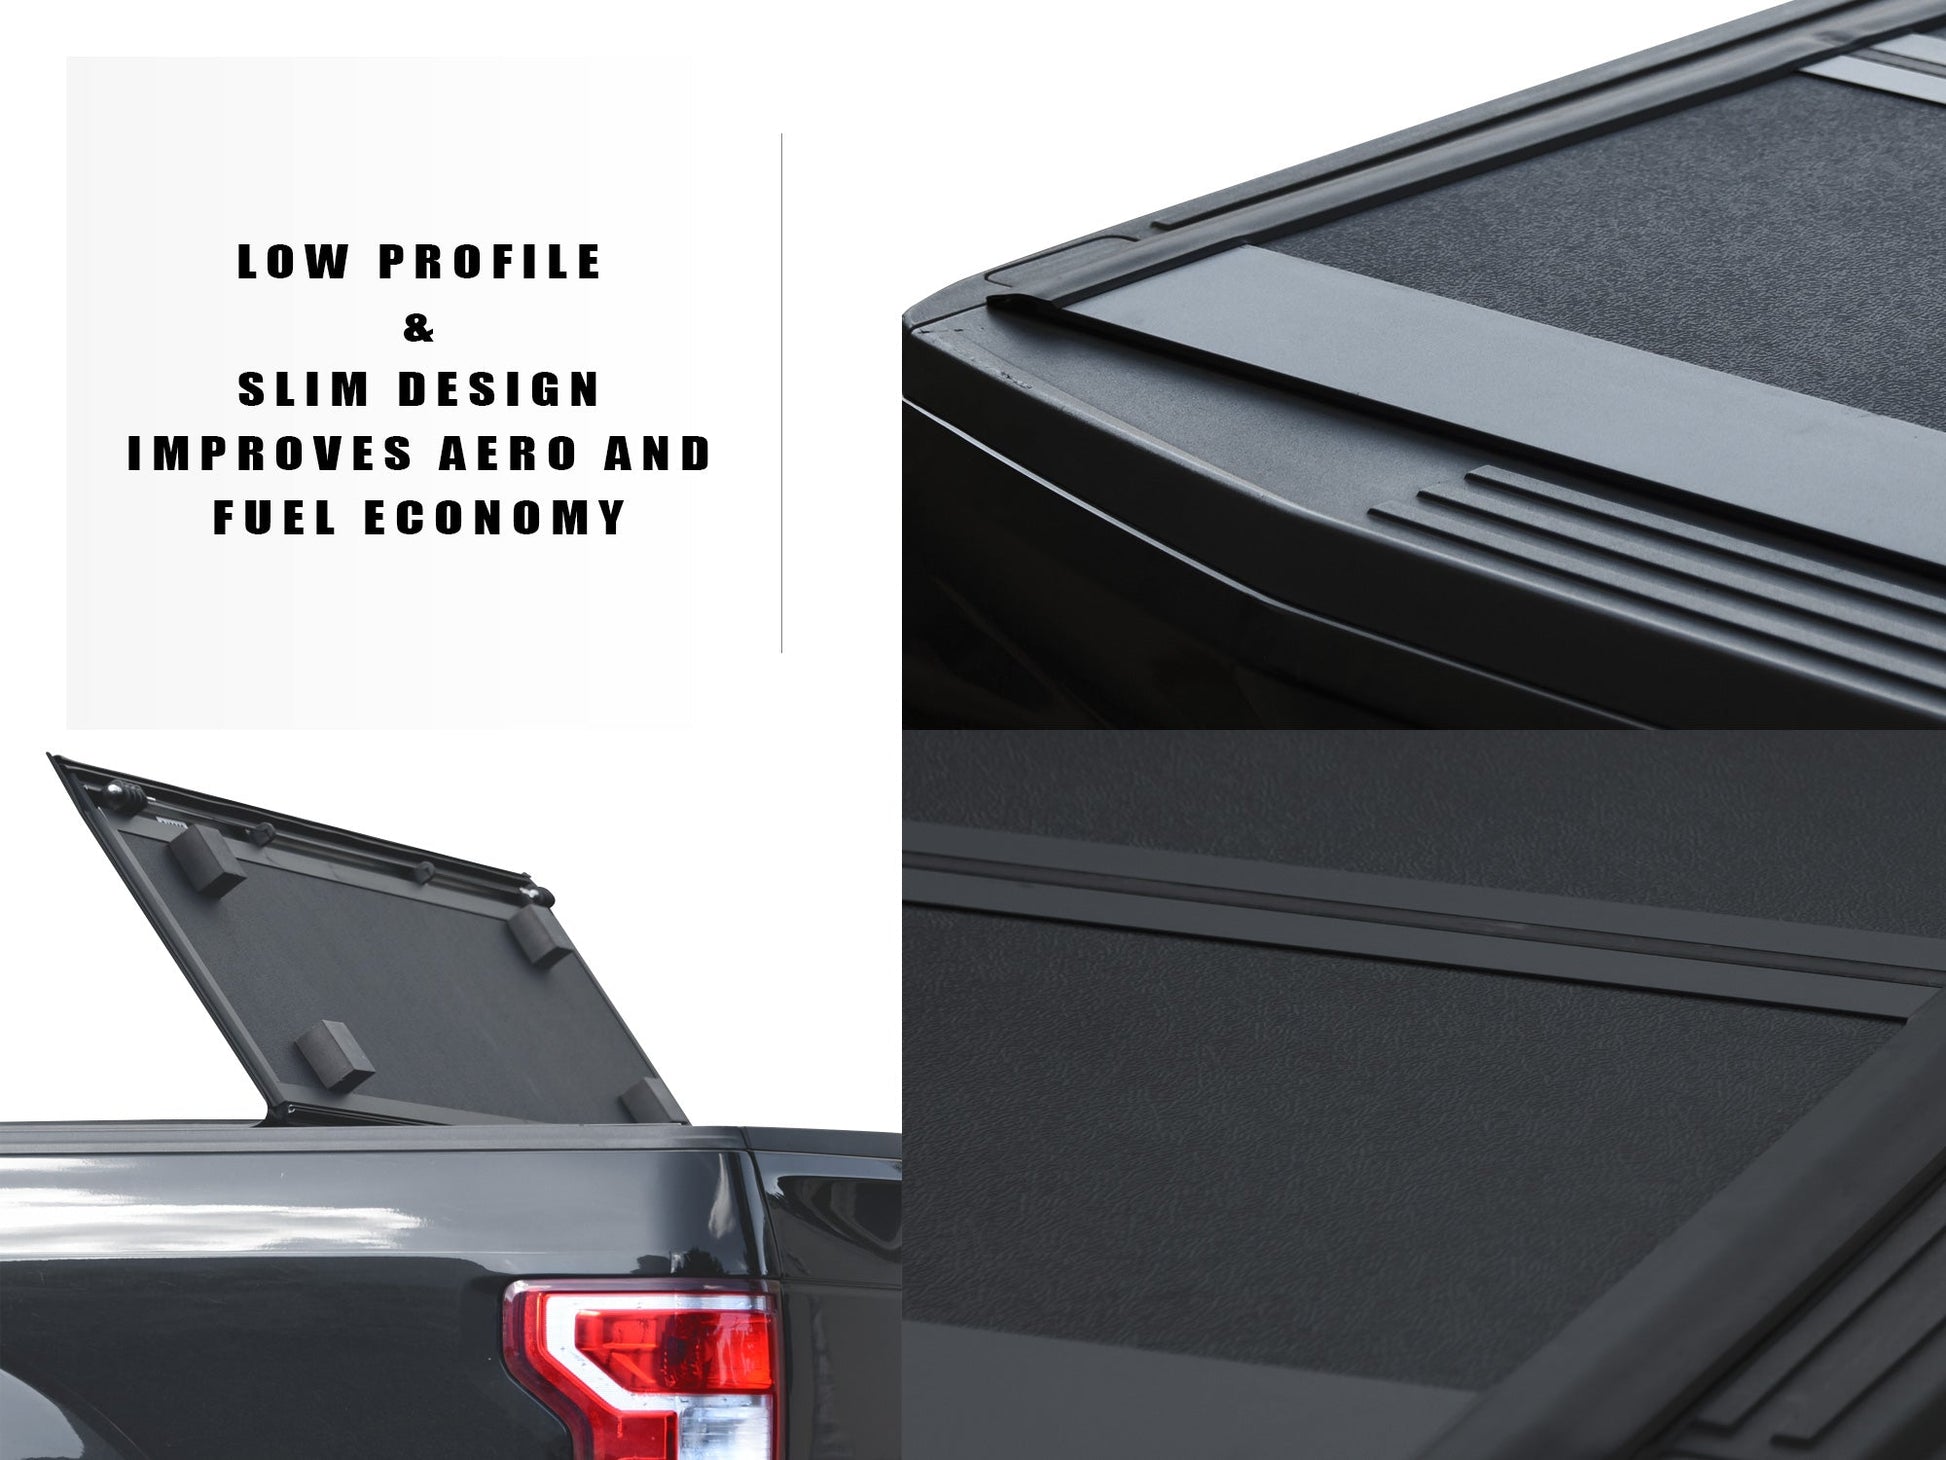 Armordillo 2009-2018 Dodge Ram 1500 CoveRex TFX Series Folding Truck Bed Tonneau Cover (5.8 Ft Bed) - Bayson R Motorsports